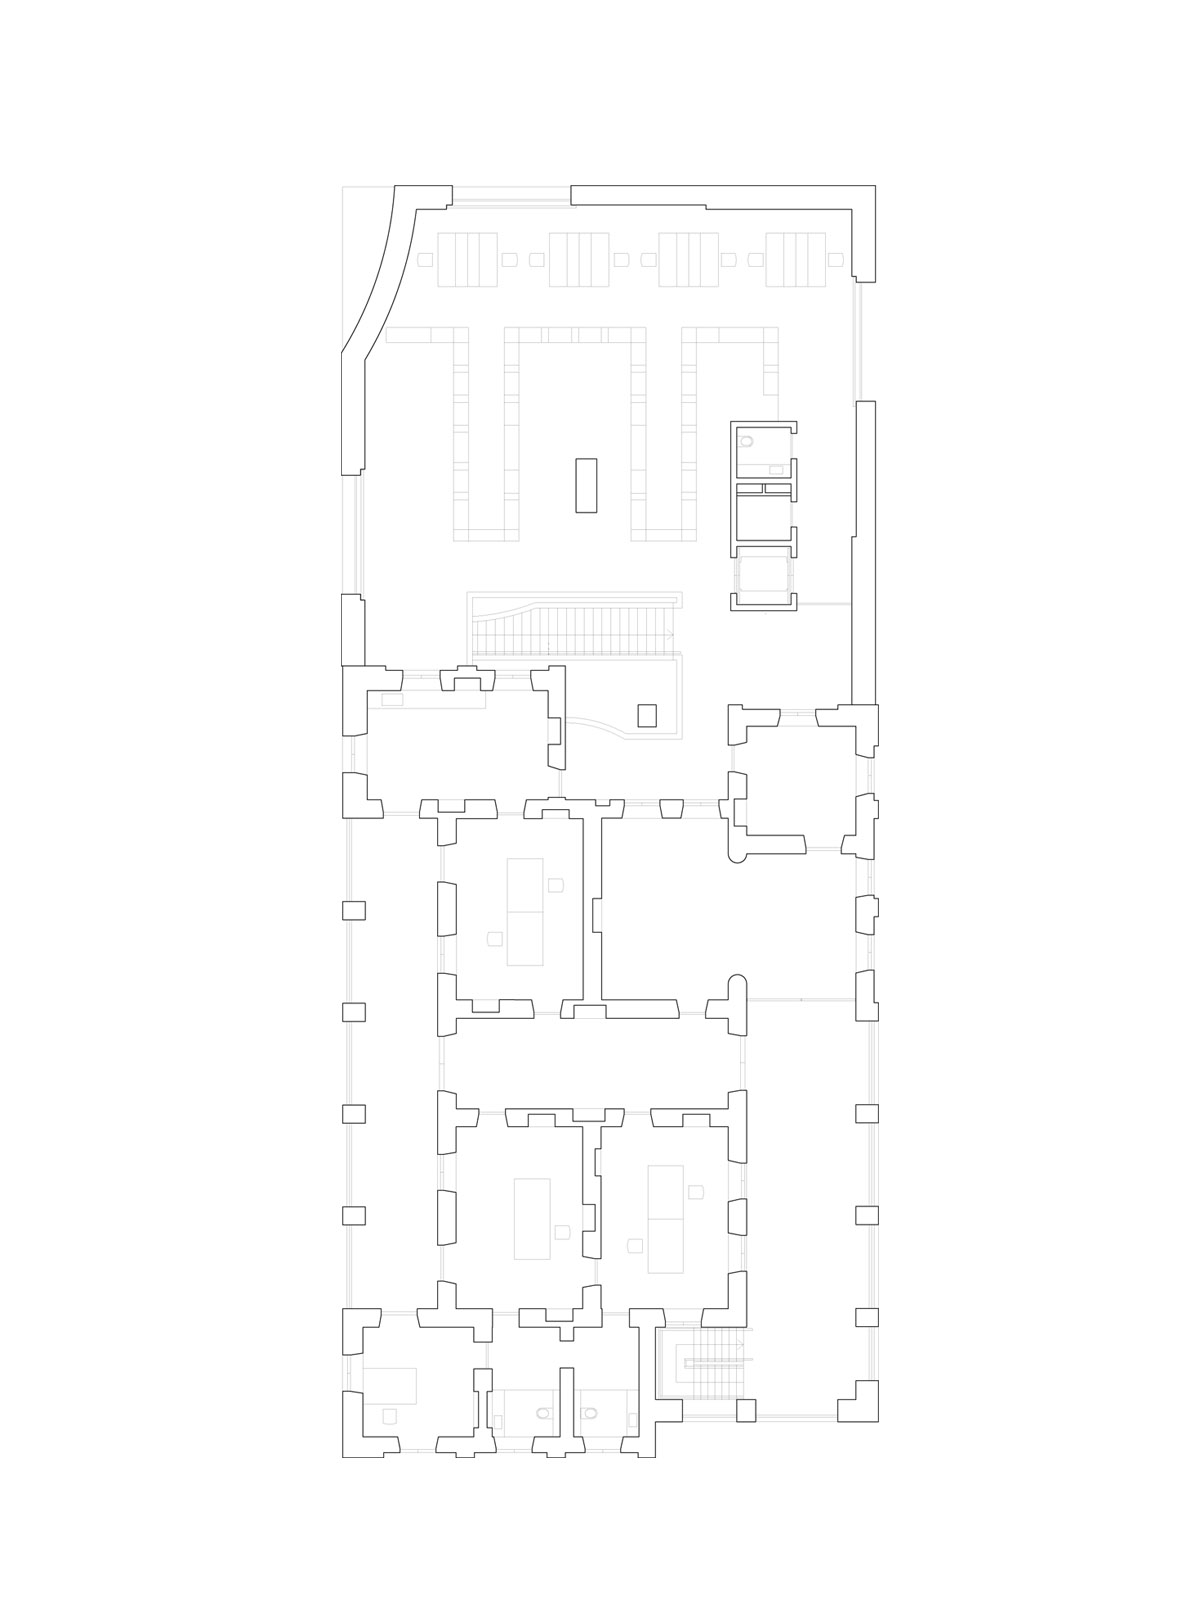 Image of 20220802 AnneHoltrop Manama Plans 2 in Manama post office - Cosentino